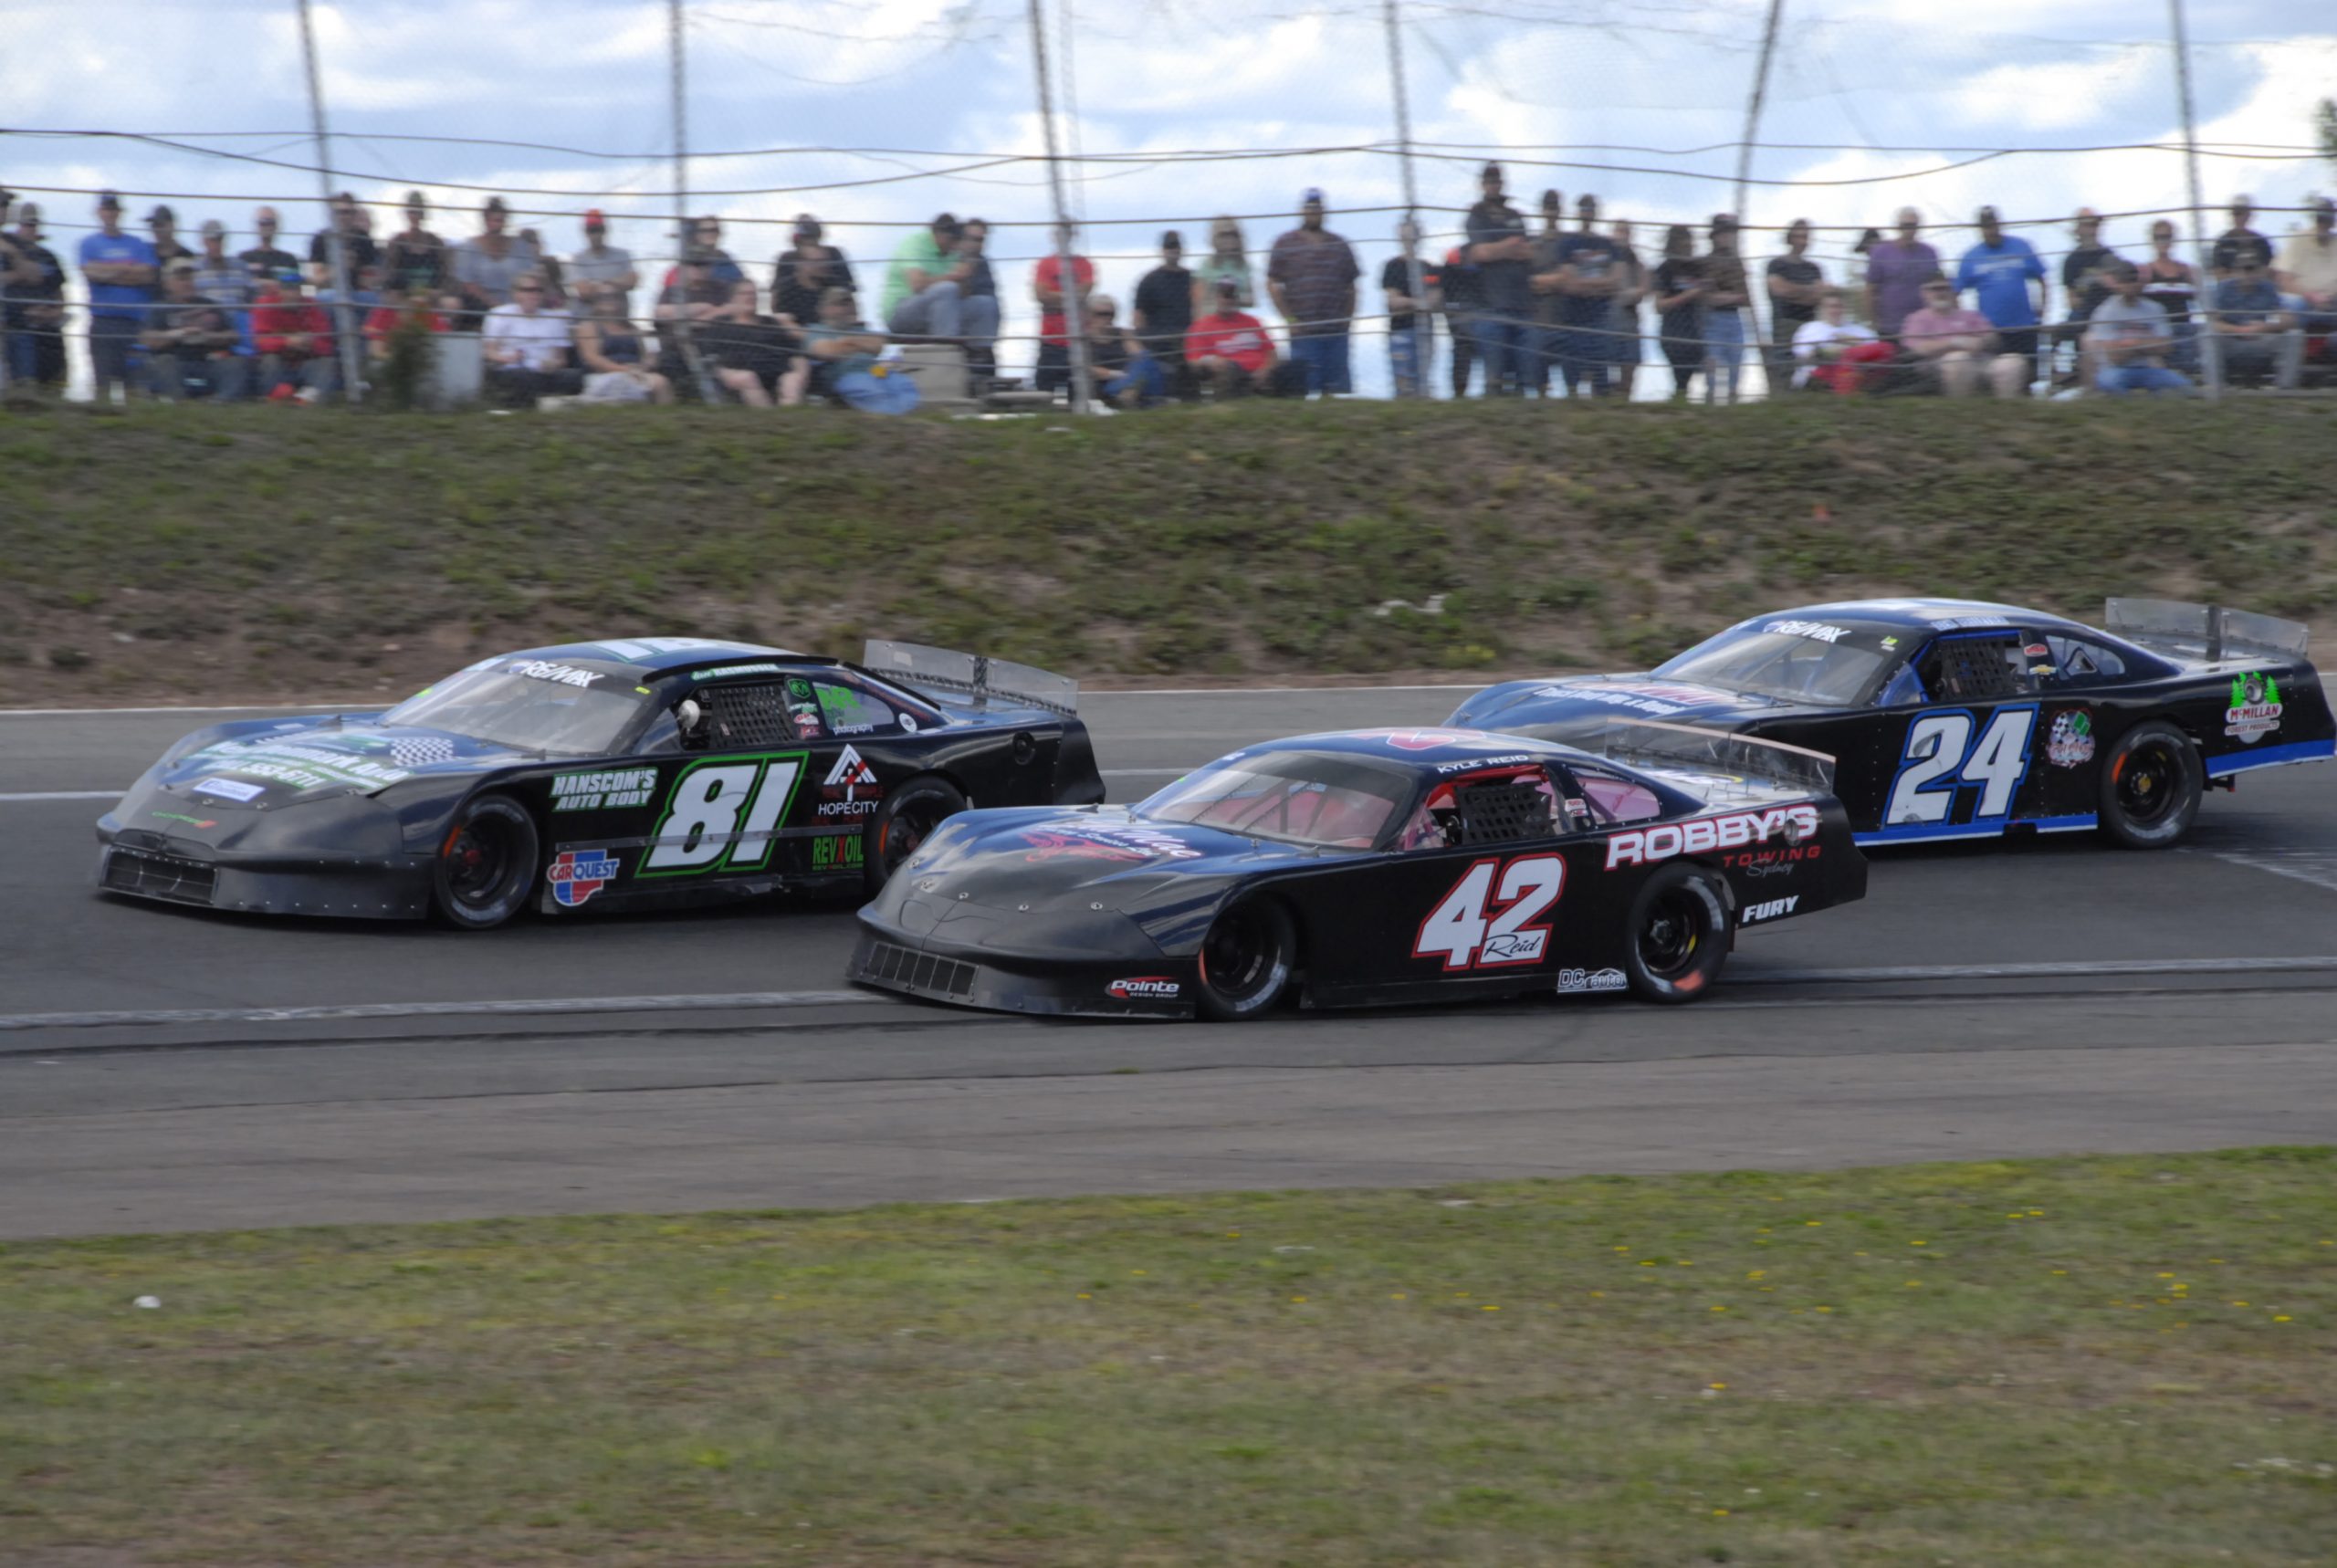 FOUR RACE PRO STOCK SERIES RETURNING TO NEW BRUNSWICK TRACKS IN 2021